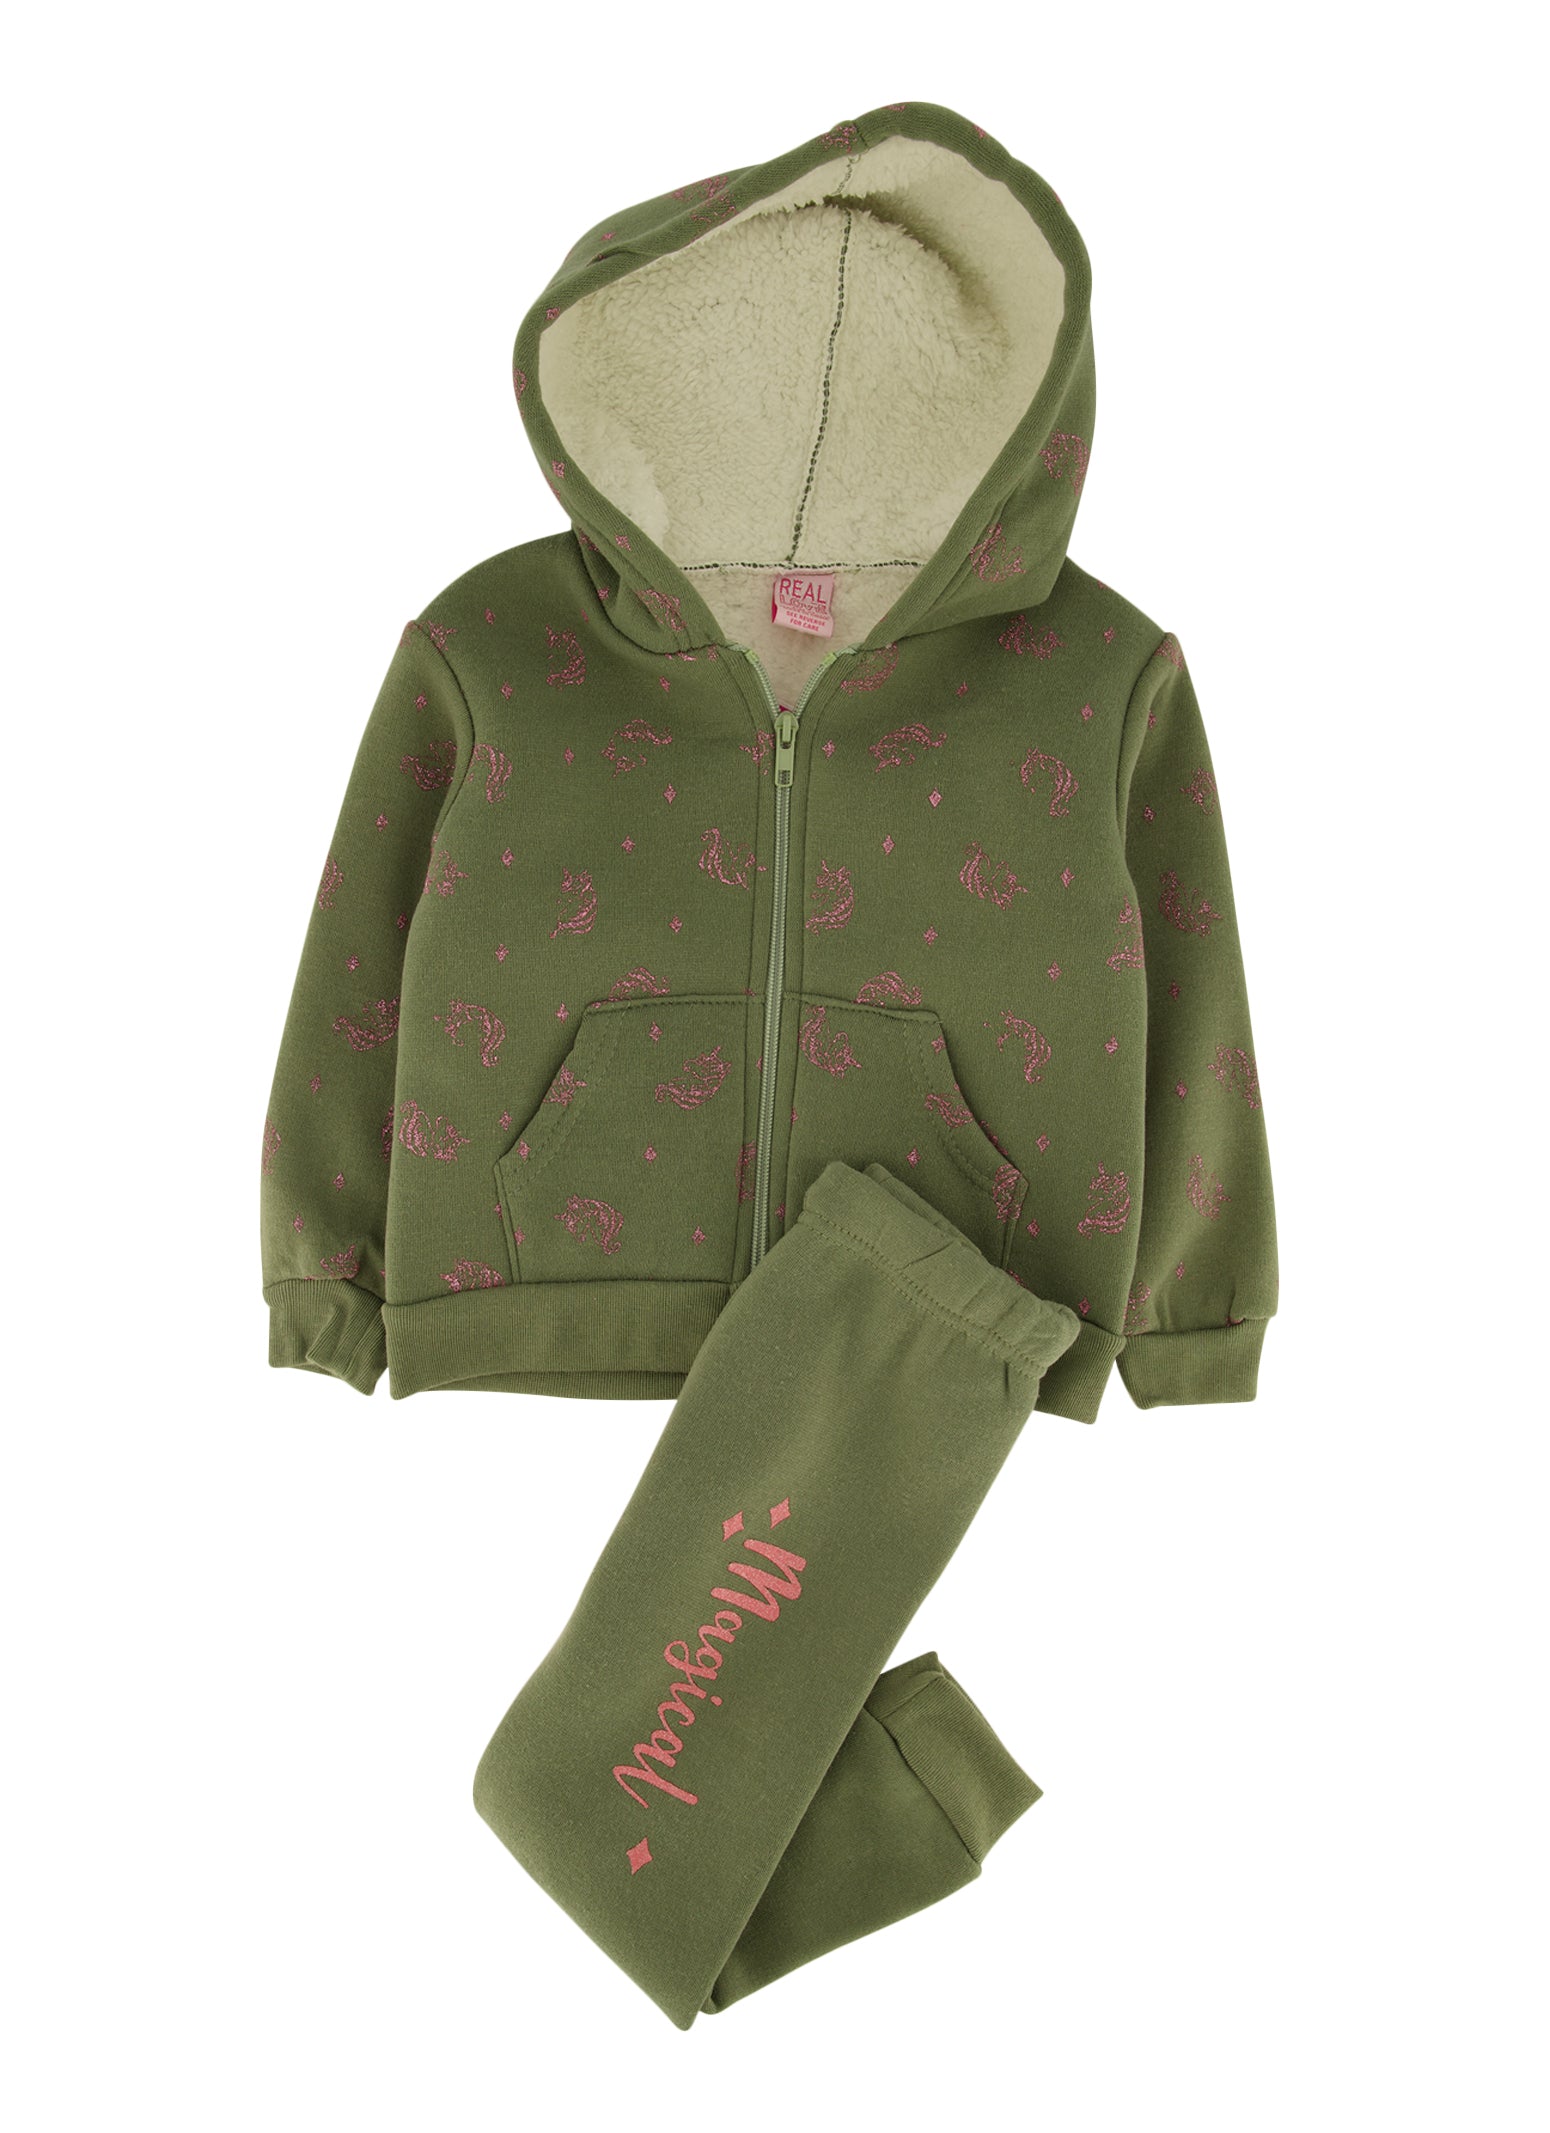 Toddler Girls Glitter Unicorn Zip Up Sherpa Lined Hoodie and Joggers, Green, Size 2T